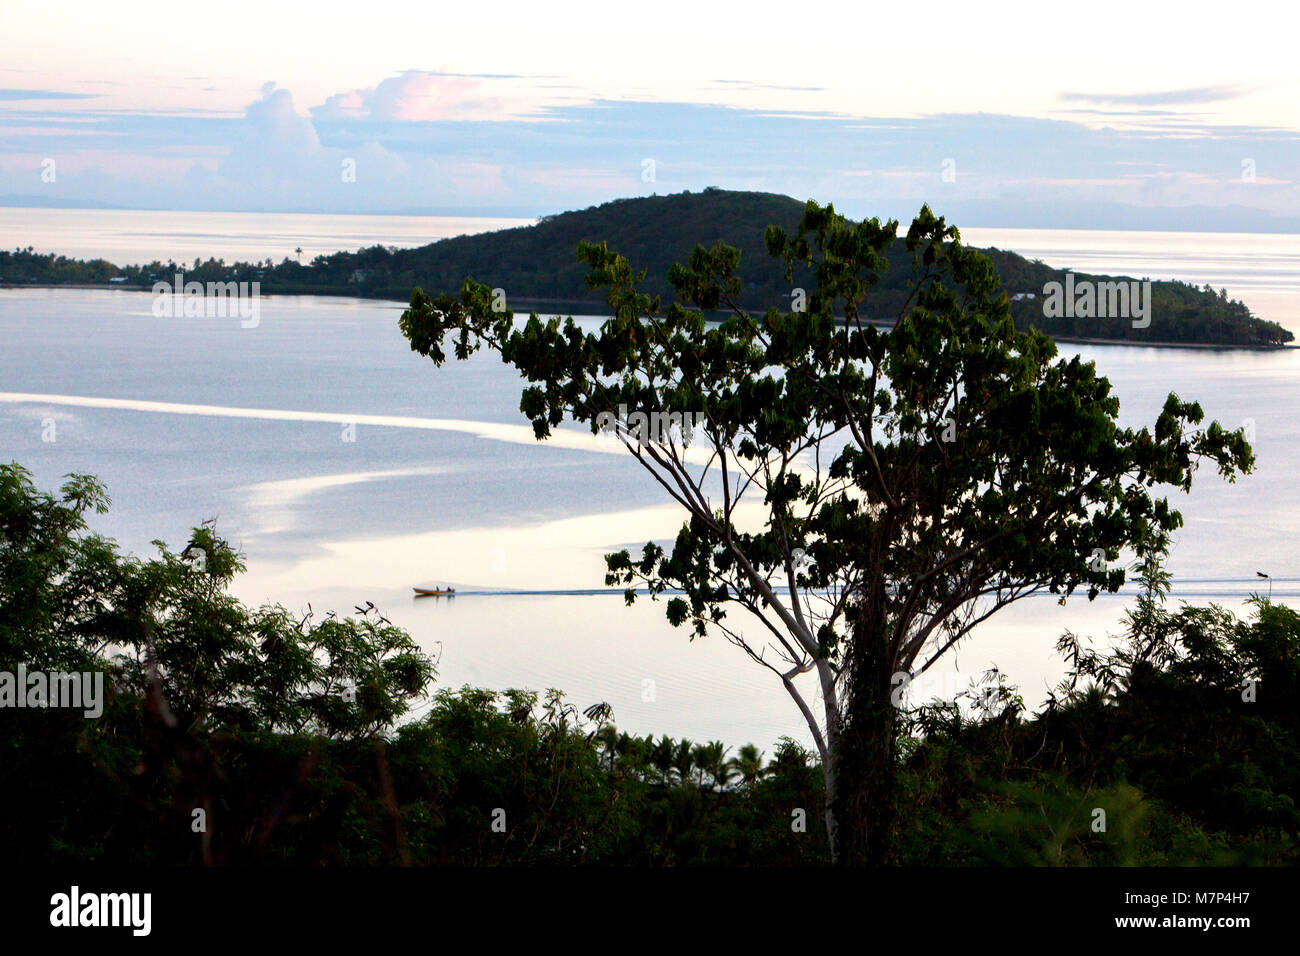 Beautiful landscape of Fiji island during high tide with tree in foreground and ocean with hill on island and small boat passing in background during, Stock Photo